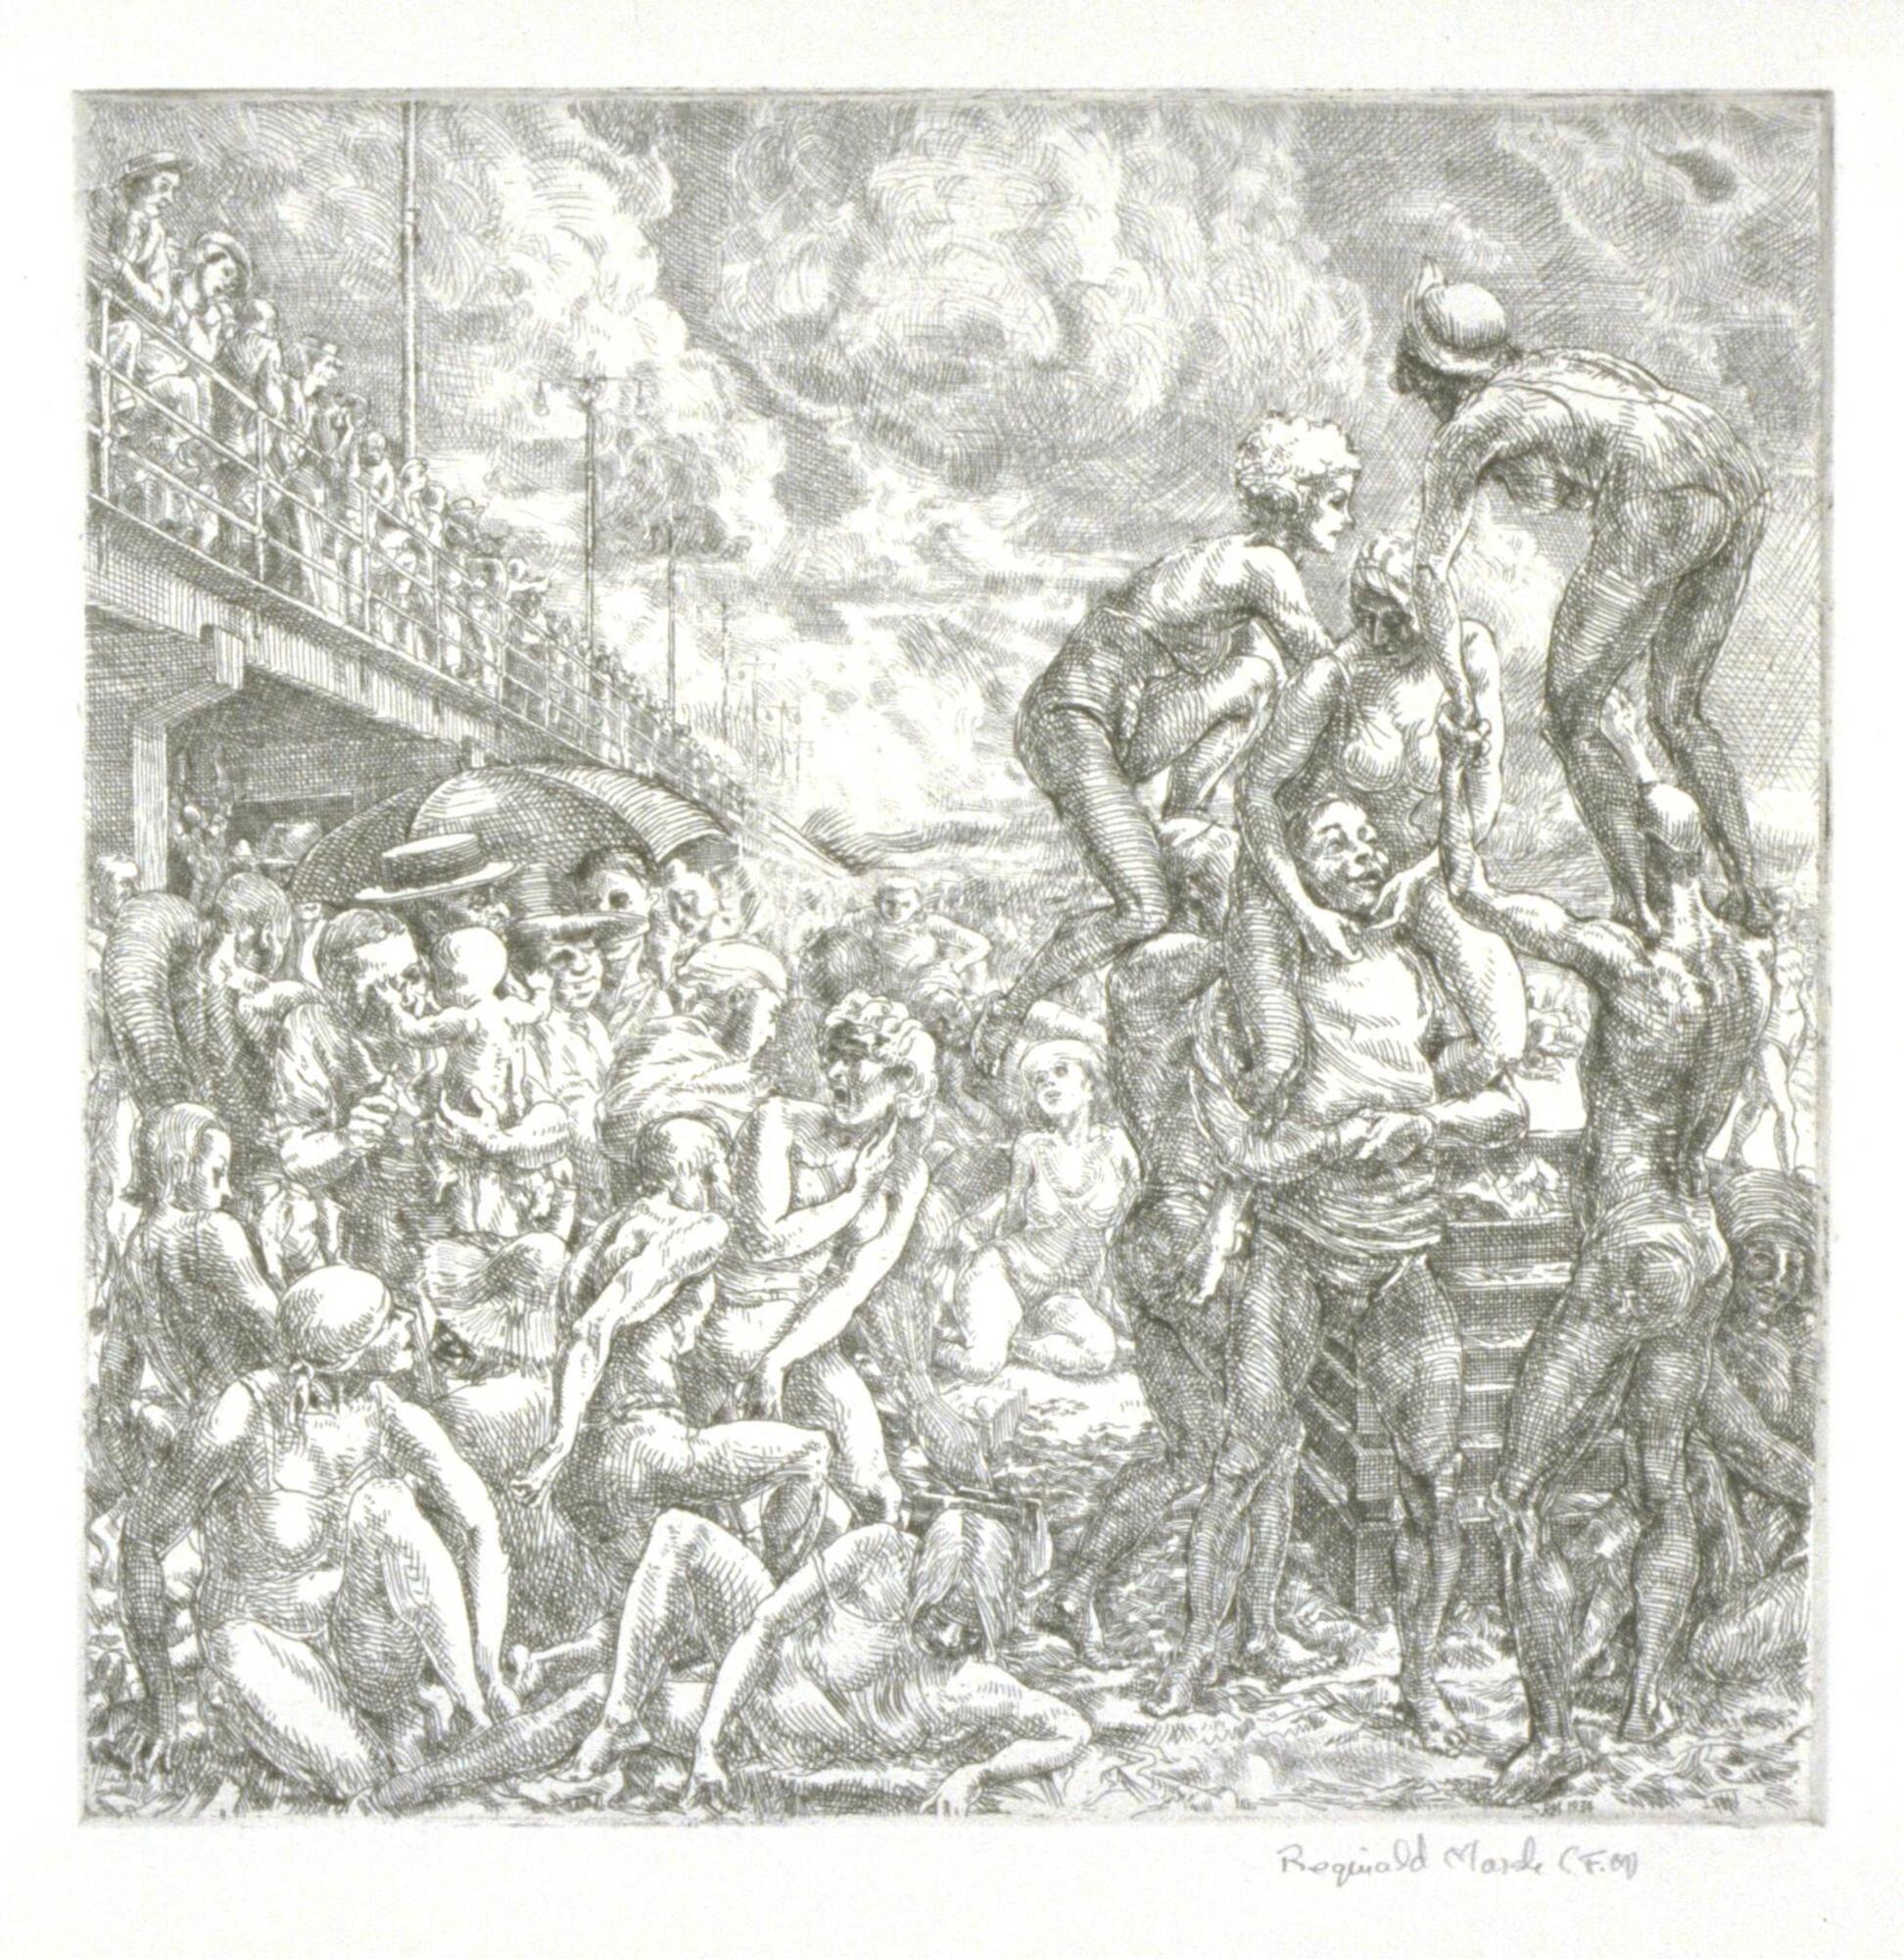 This print shows a festive, large, dense crowd of people at a beach. Some figures on the right side of the print appear to be climbing on top of each other in a human pyramid. To the left is a bridge or boardwalk that is also crowded with people.